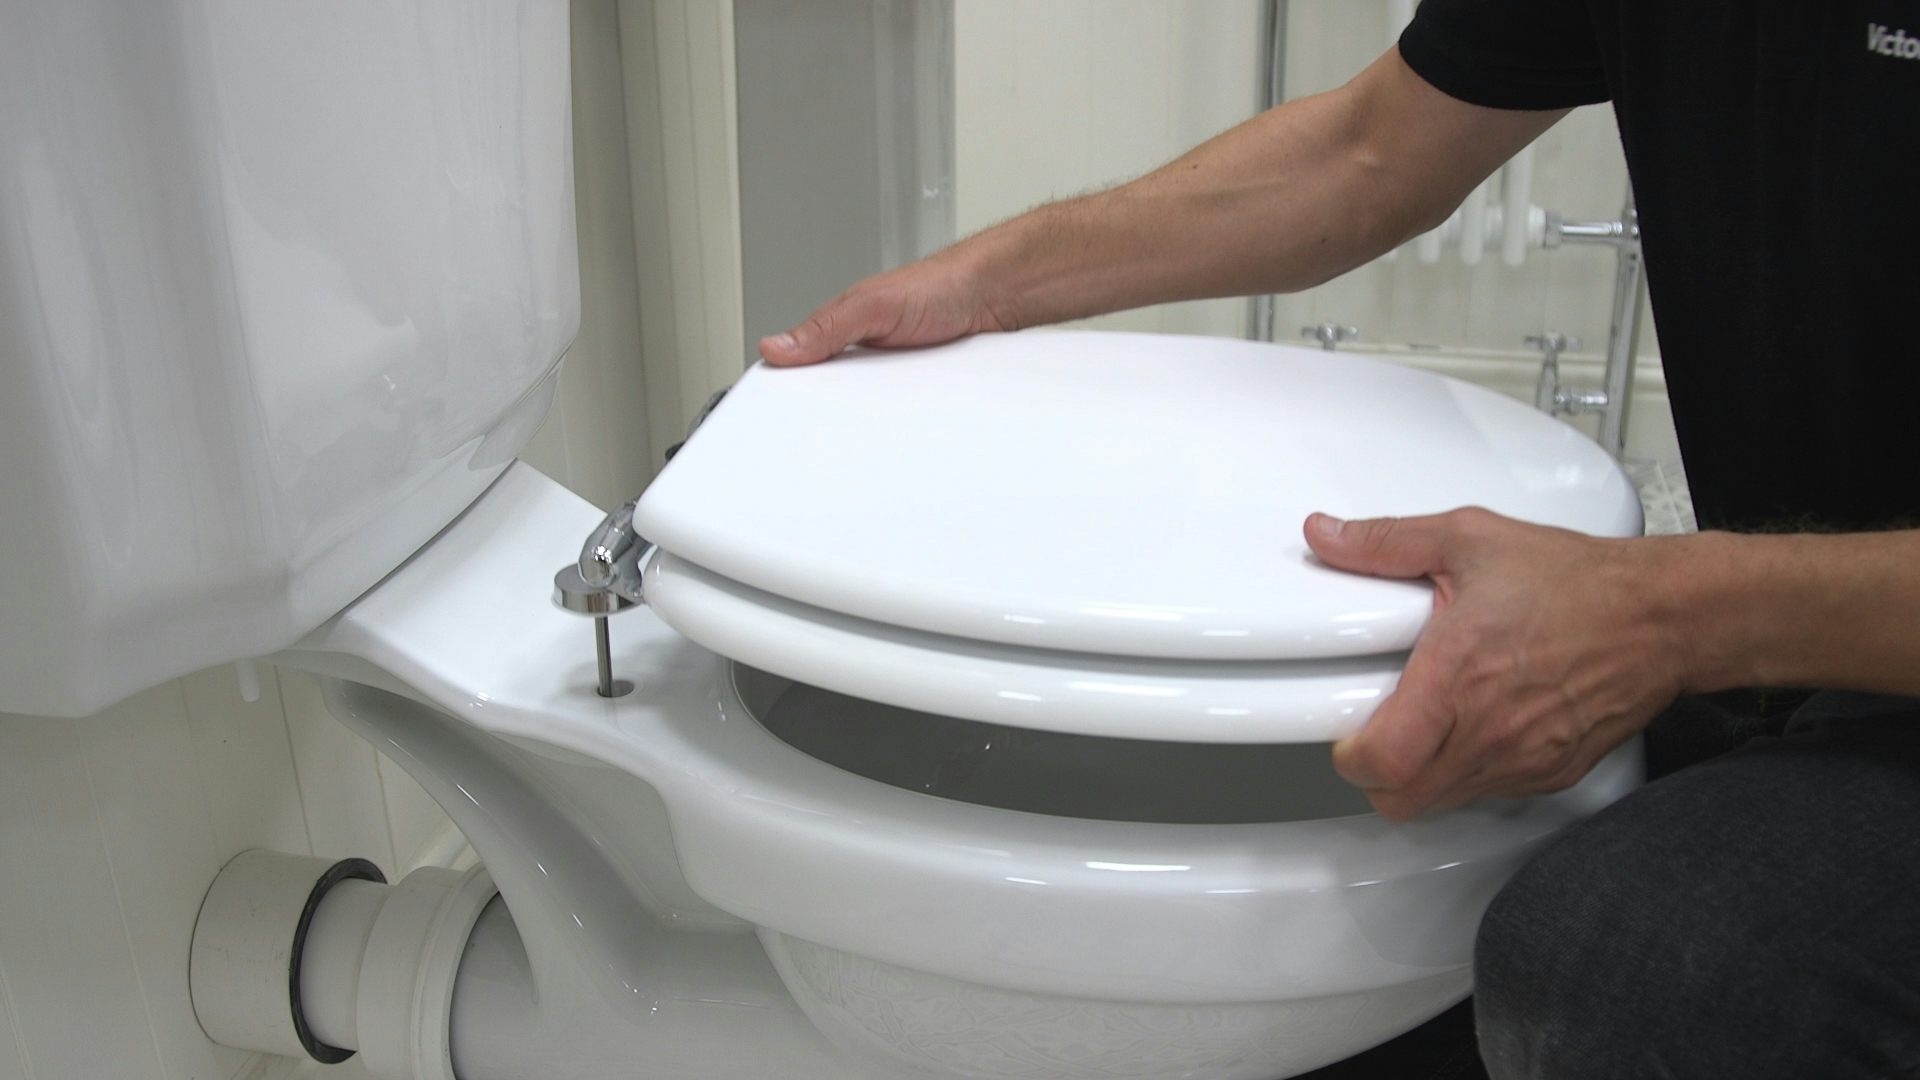 How to fit or replace a toilet seat